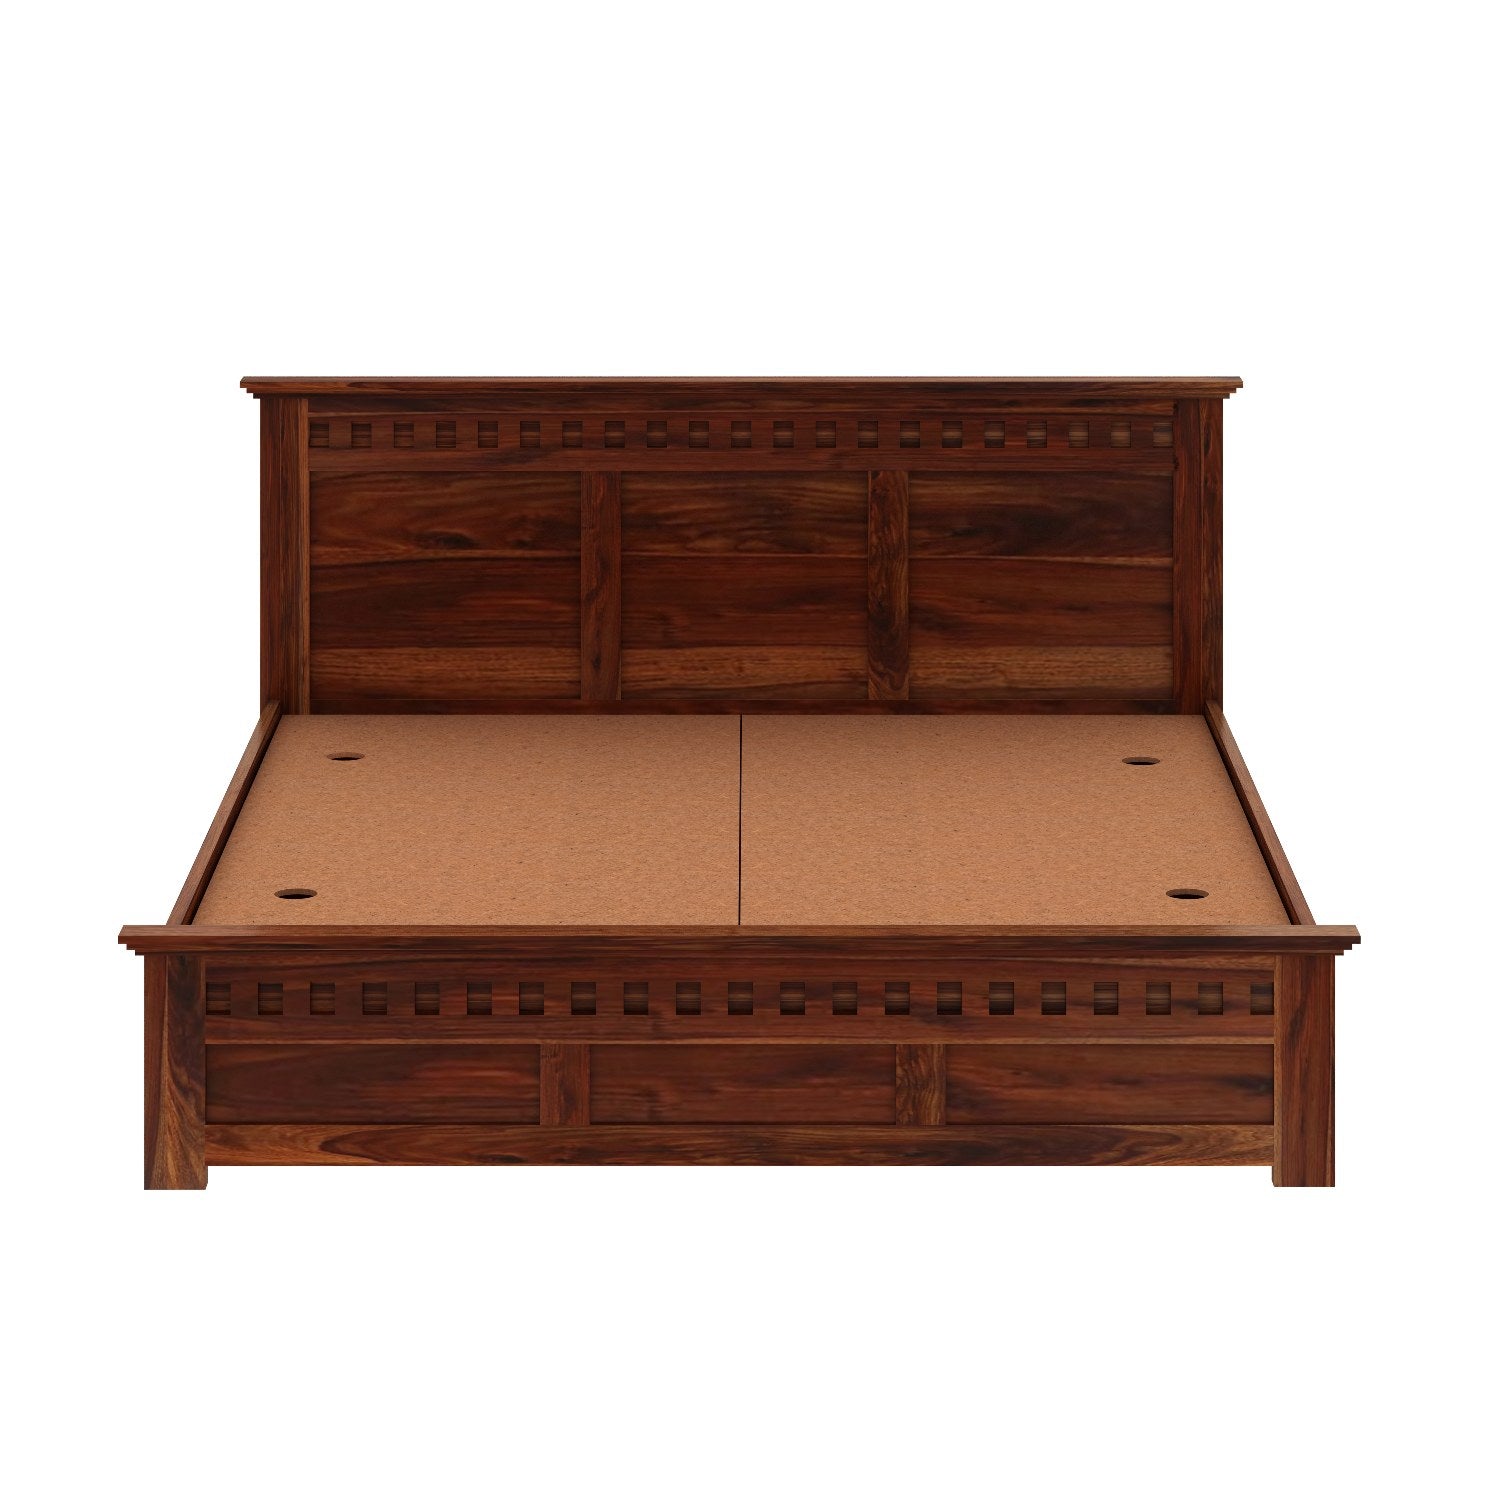 Amer Solid Sheesham Wood Bed With Box Storage (Queen Size, Natural Finish)